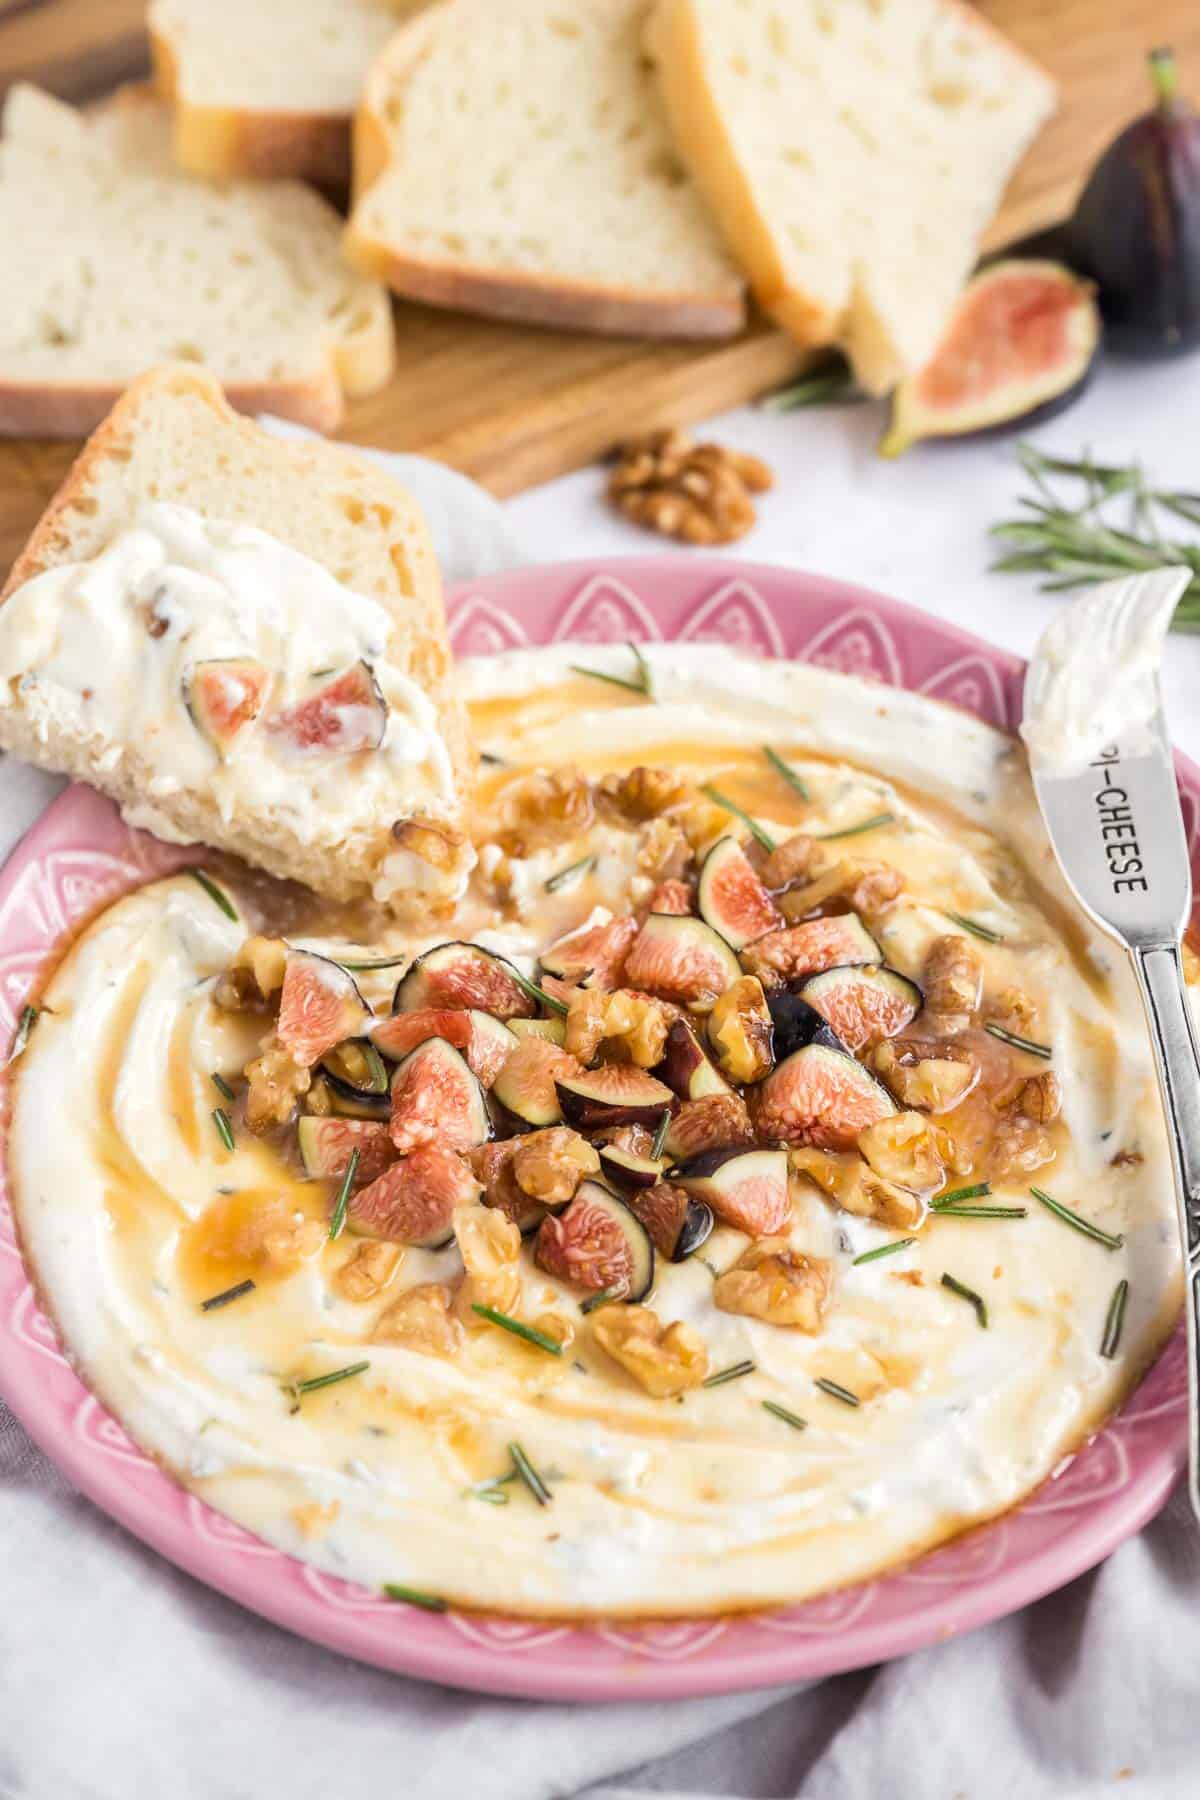 A pink bowl filled with a feta cheese dip with a slice of dipped bread on the bowl.